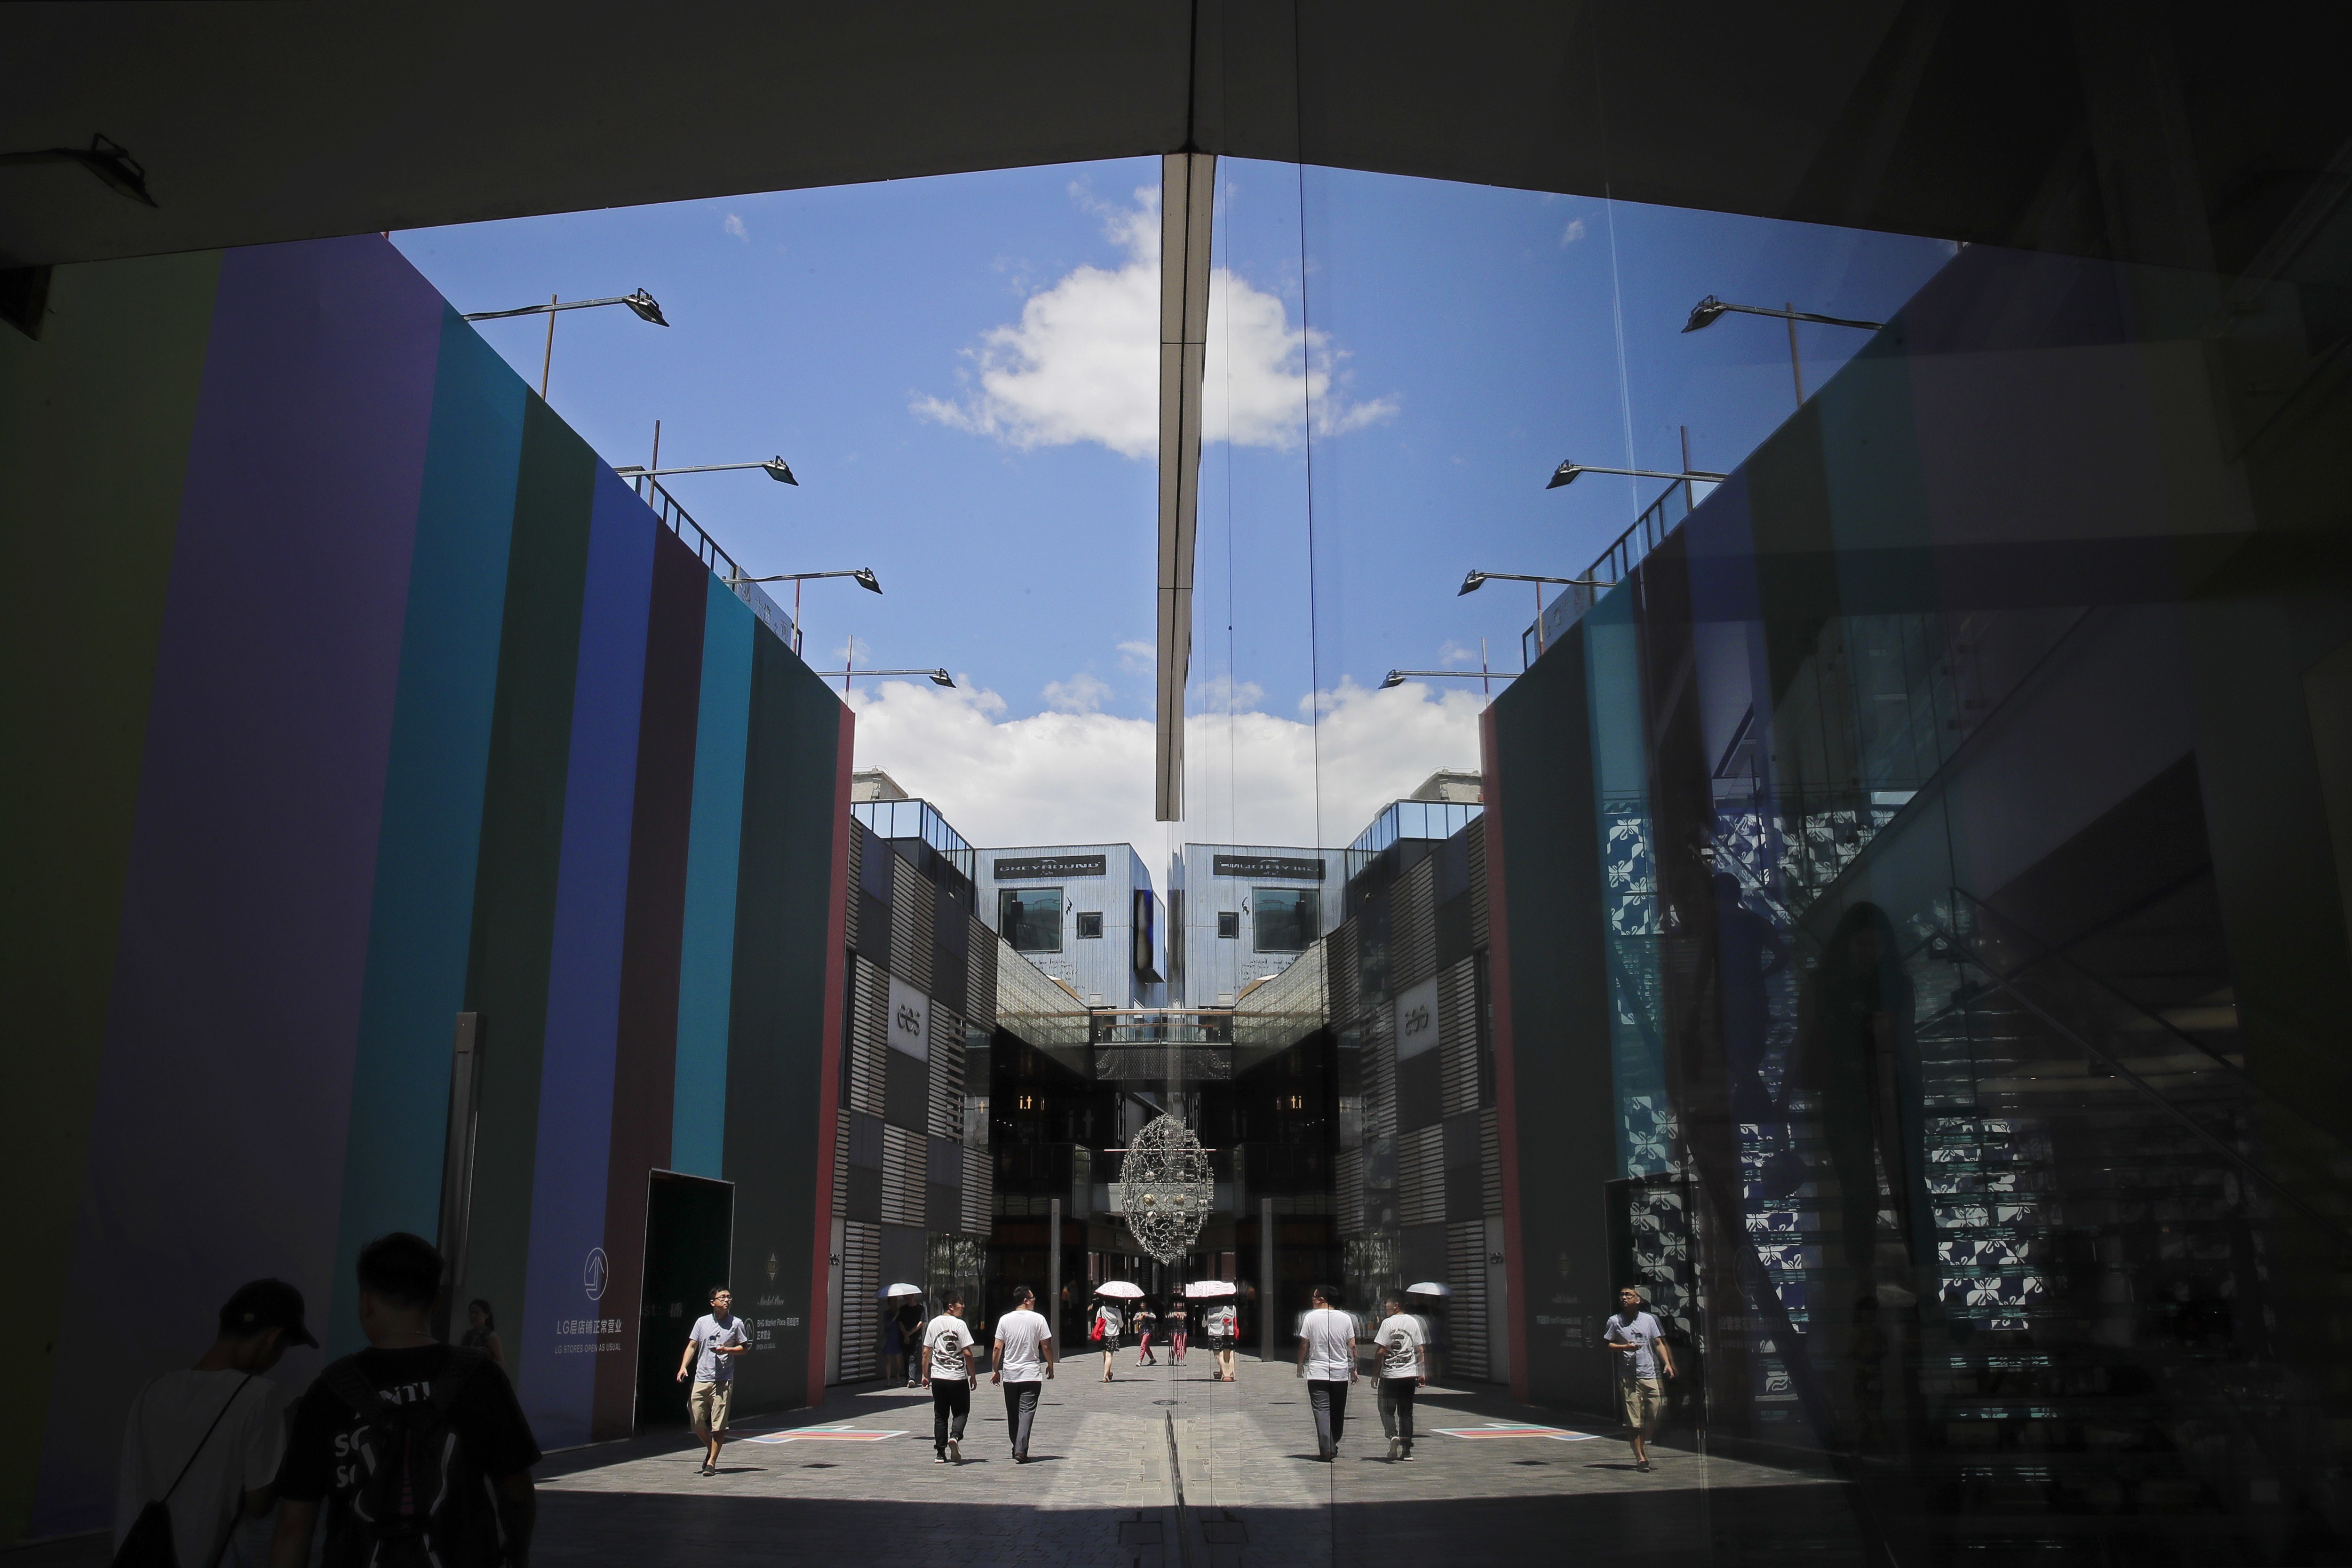 People walking through a popular shopping mall in Beijing are reflected in the glass panels of an Apple Store. The benefits of open, vibrant markets extend well beyond foreign businesses. Yet, China still ranks as one of the most restrictive countries for FDI, according to an OECD report. Photo: AP